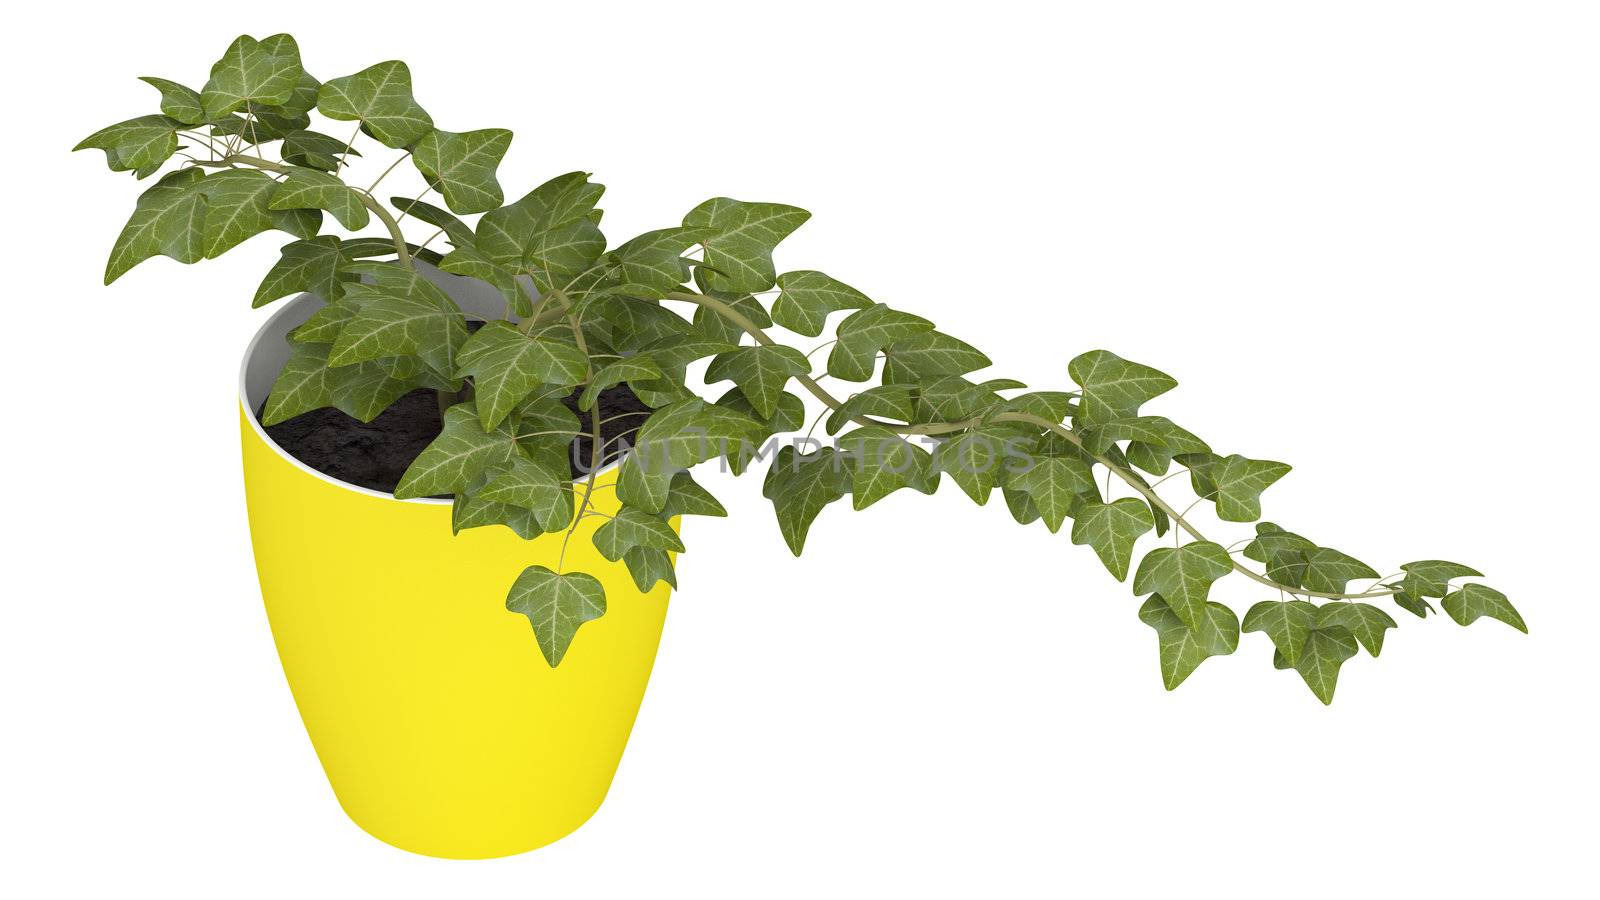 Ivy growing in a yellow pot by AlexanderMorozov